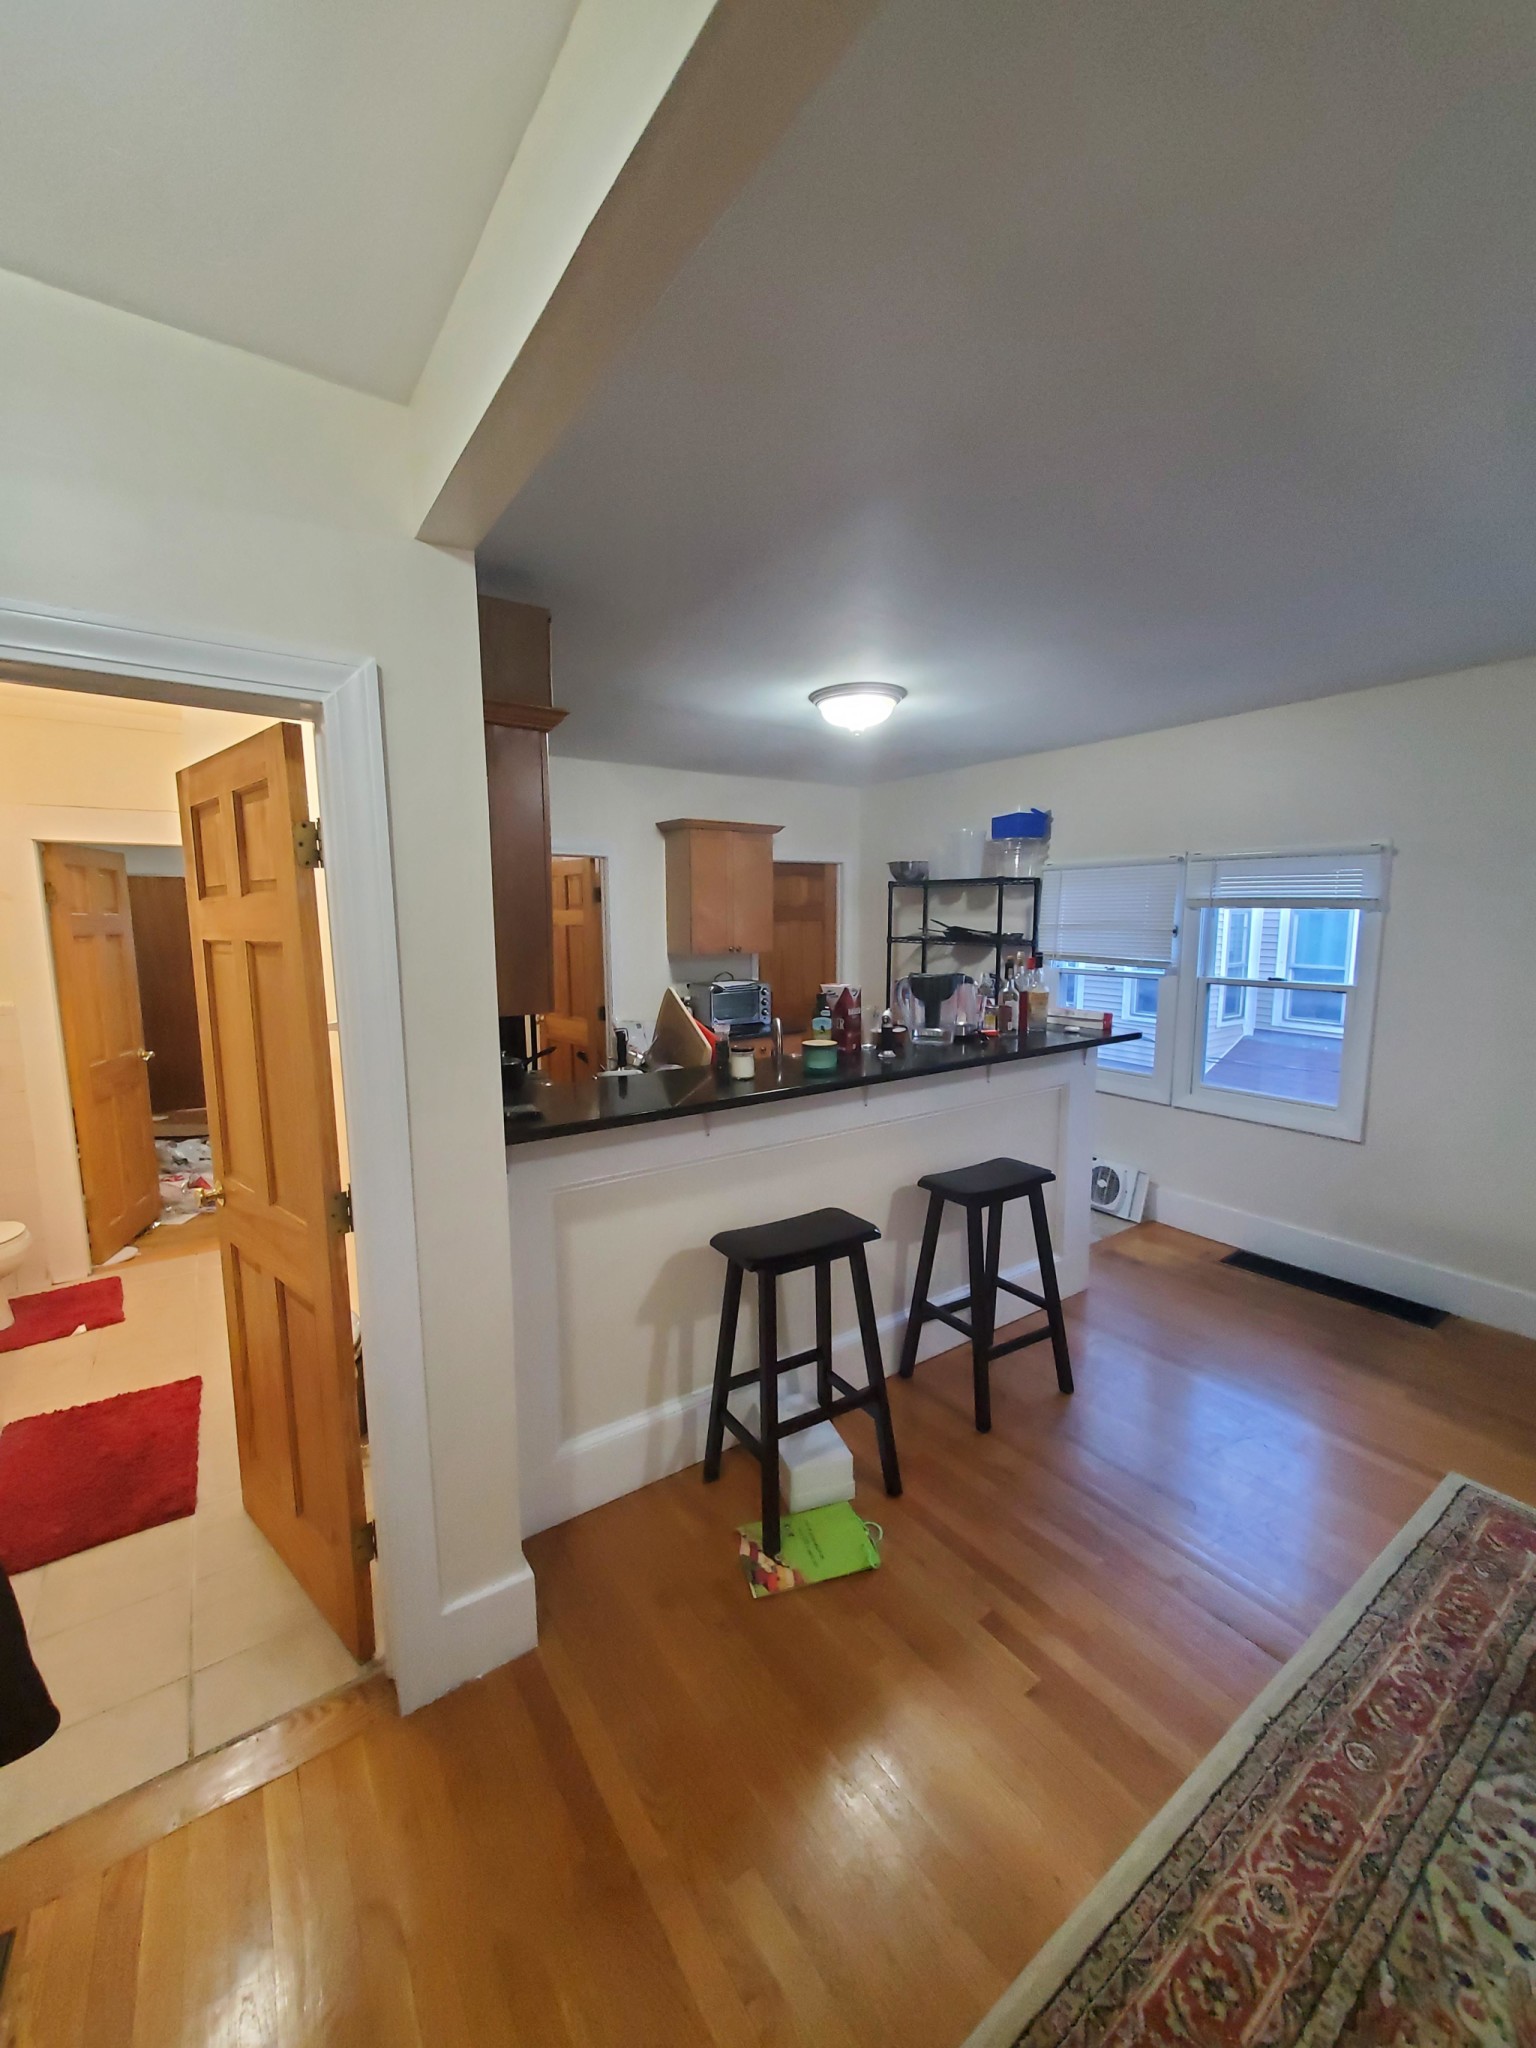 Photos of apartment on Montrose St.,Somerville MA 02143